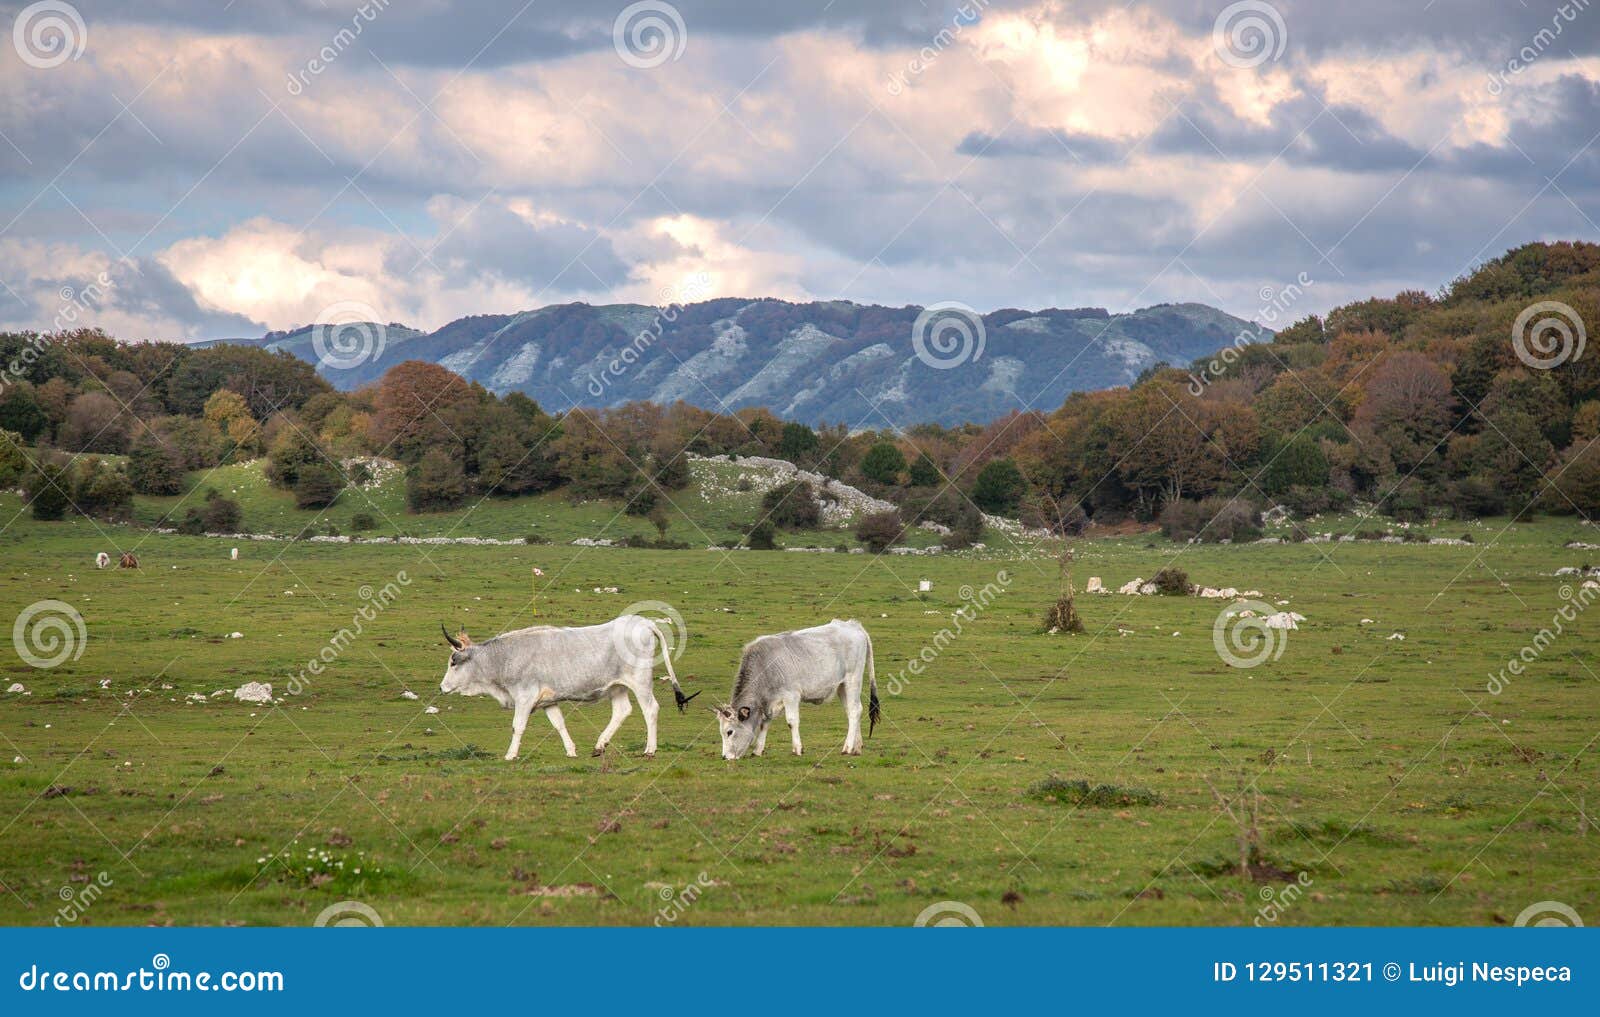 italian cows at the sunset on a green prairie